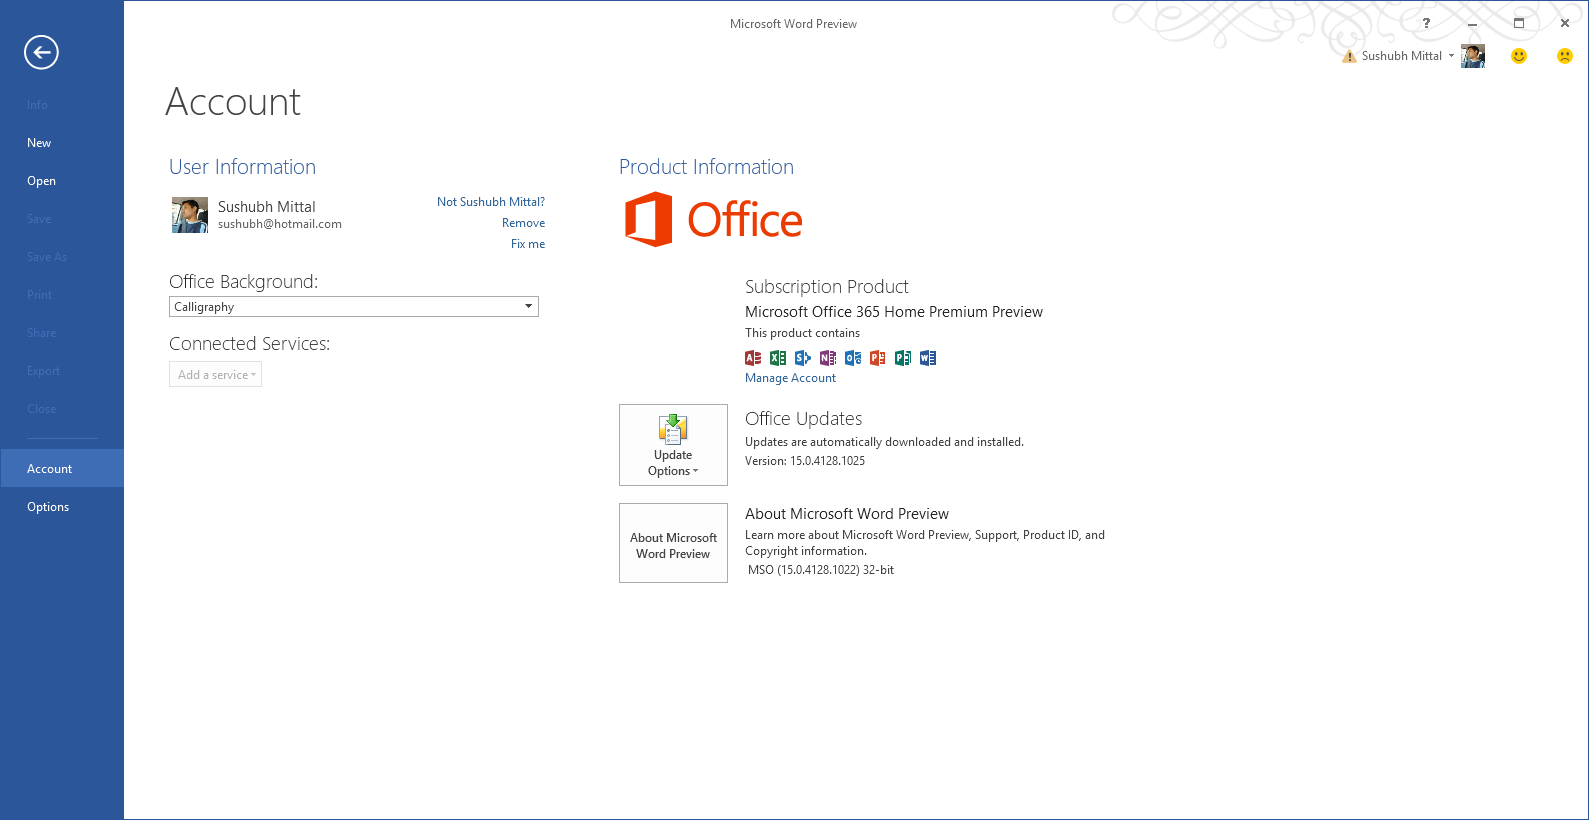 Microsoft Office 2013 Free Download Full Version